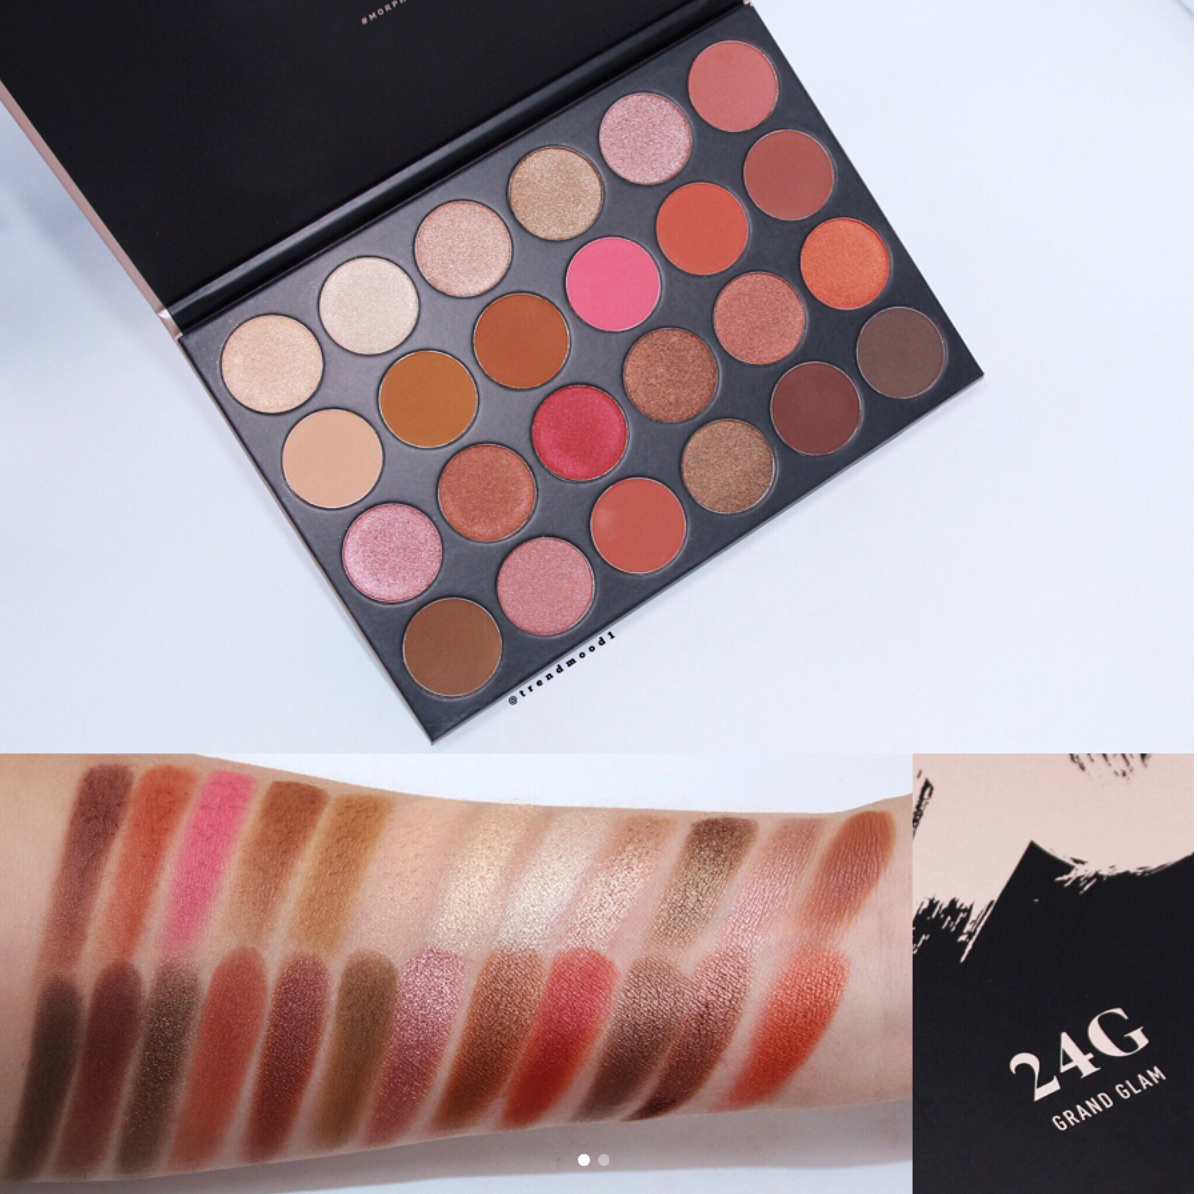 Morphe 24G Grand Glam Palette Swatches and Release Date